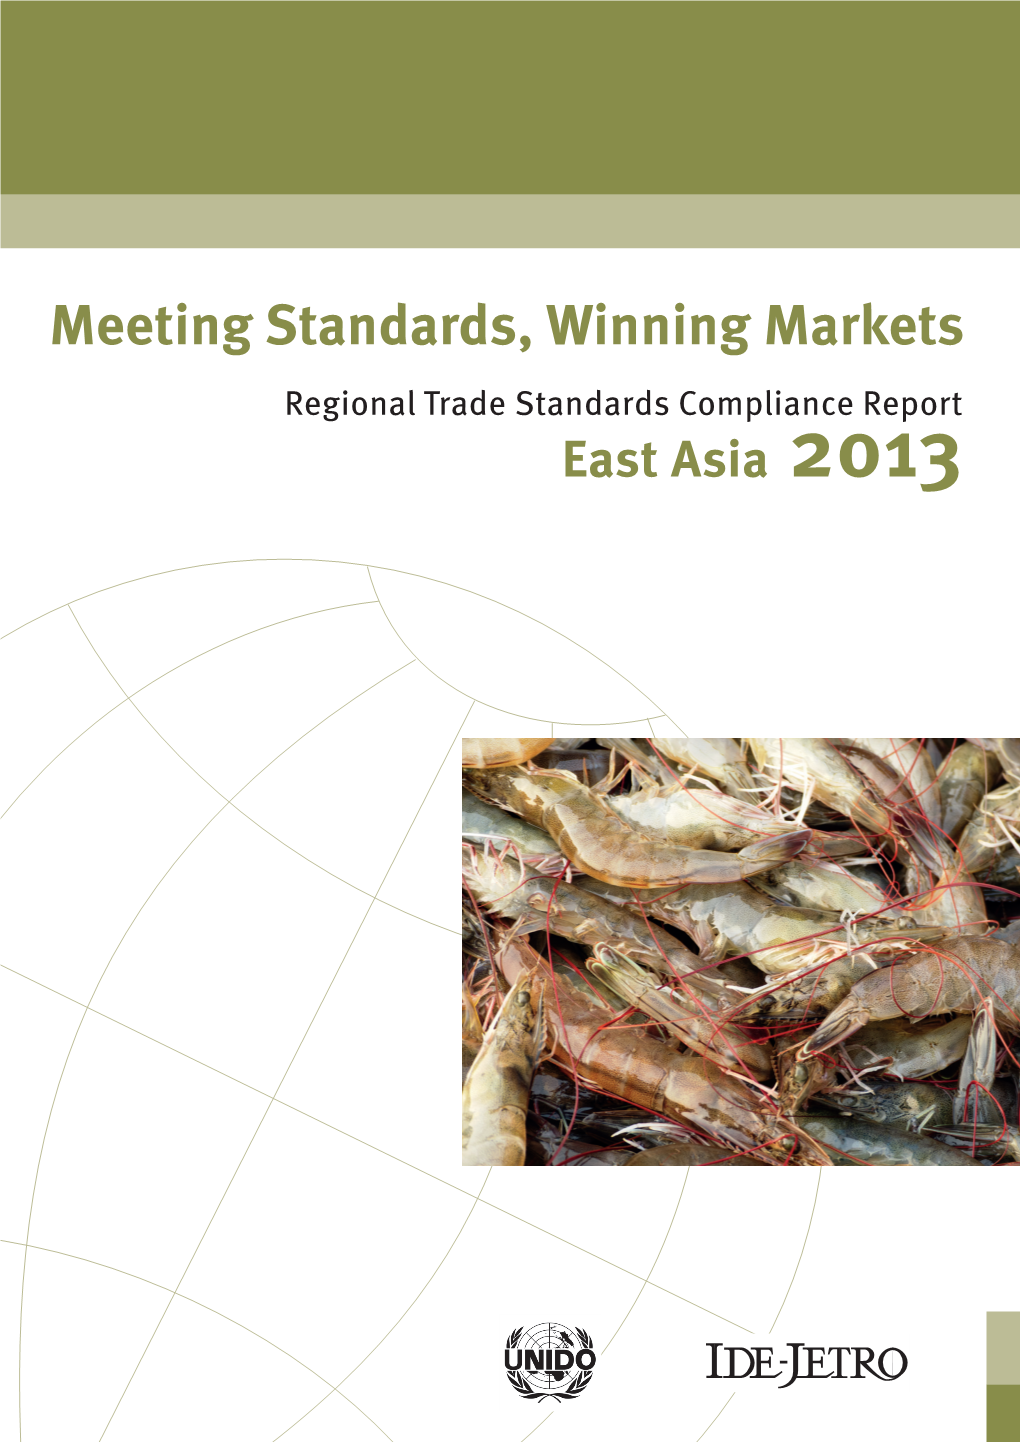 MEETING STANDARDS, WINNING MARKETS – EAST ASIA 2013 Meeting Standards, Winning Markets Regional Trade Standards Compliance Report East Asia 2013